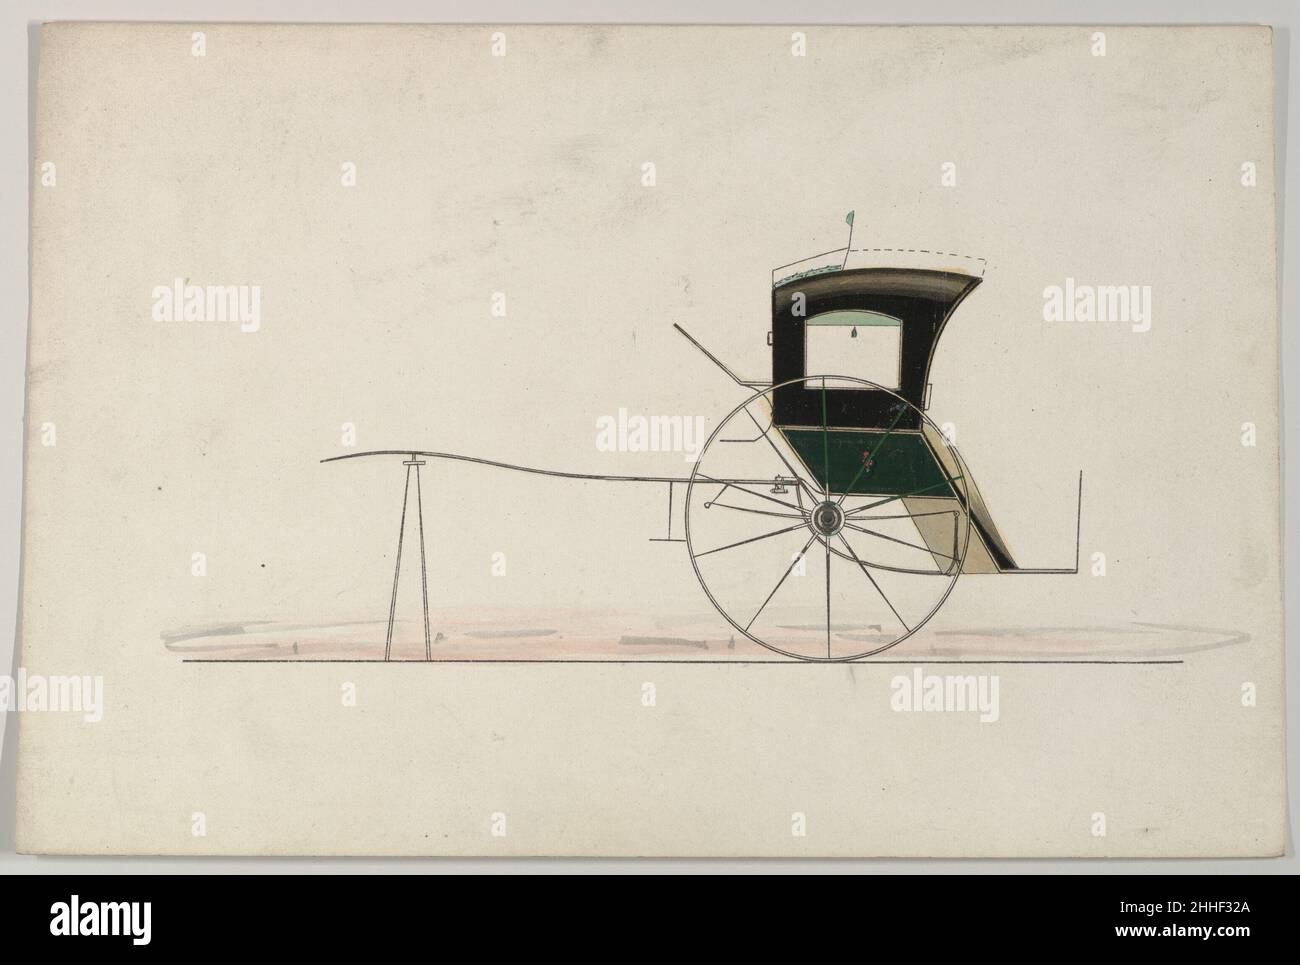 Design for Reverse Body Hansom Cab (unnumbered) 1850–74 Brewster & Co. American Brewster & Company HistoryEstablished in 1810 by James Brewster (1788–1866) in New Haven, Connecticut, Brewster & Company, specialized in the manufacture of fine carriages. The founder opened a New York showroom in 1827 at 53-54 Broad Street, and the company flourished under generations of family leadership. Expansion necessitated moves around lower Manhattan, with name changes reflecting shifts of management–James Brewster & Sons operated at 25 Canal Street, James Brewster Sons at 396 Broadway, and Brewster of Bro Stock Photo